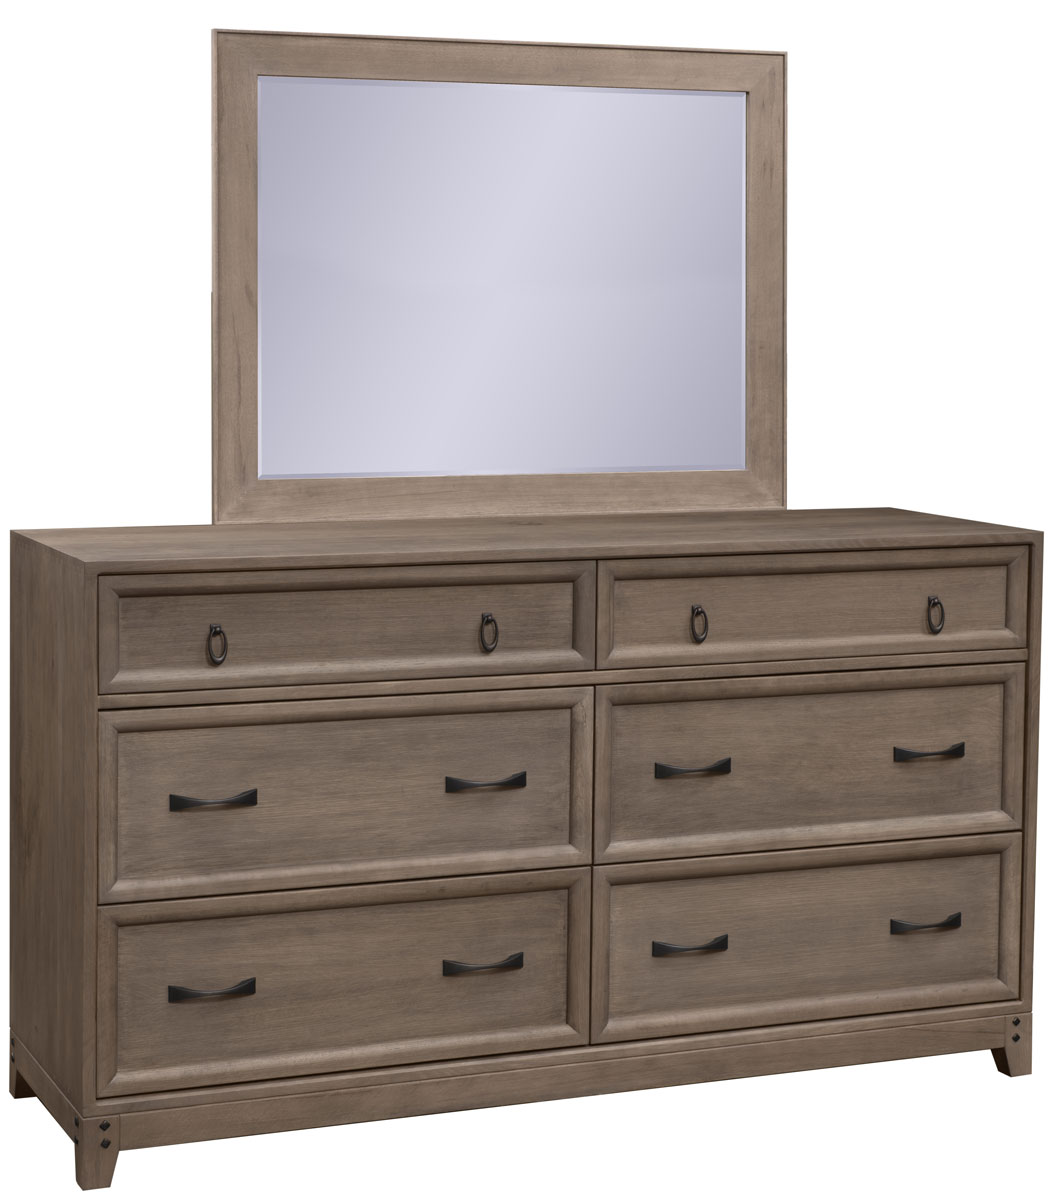 Glendale Double Dresser with Mirror